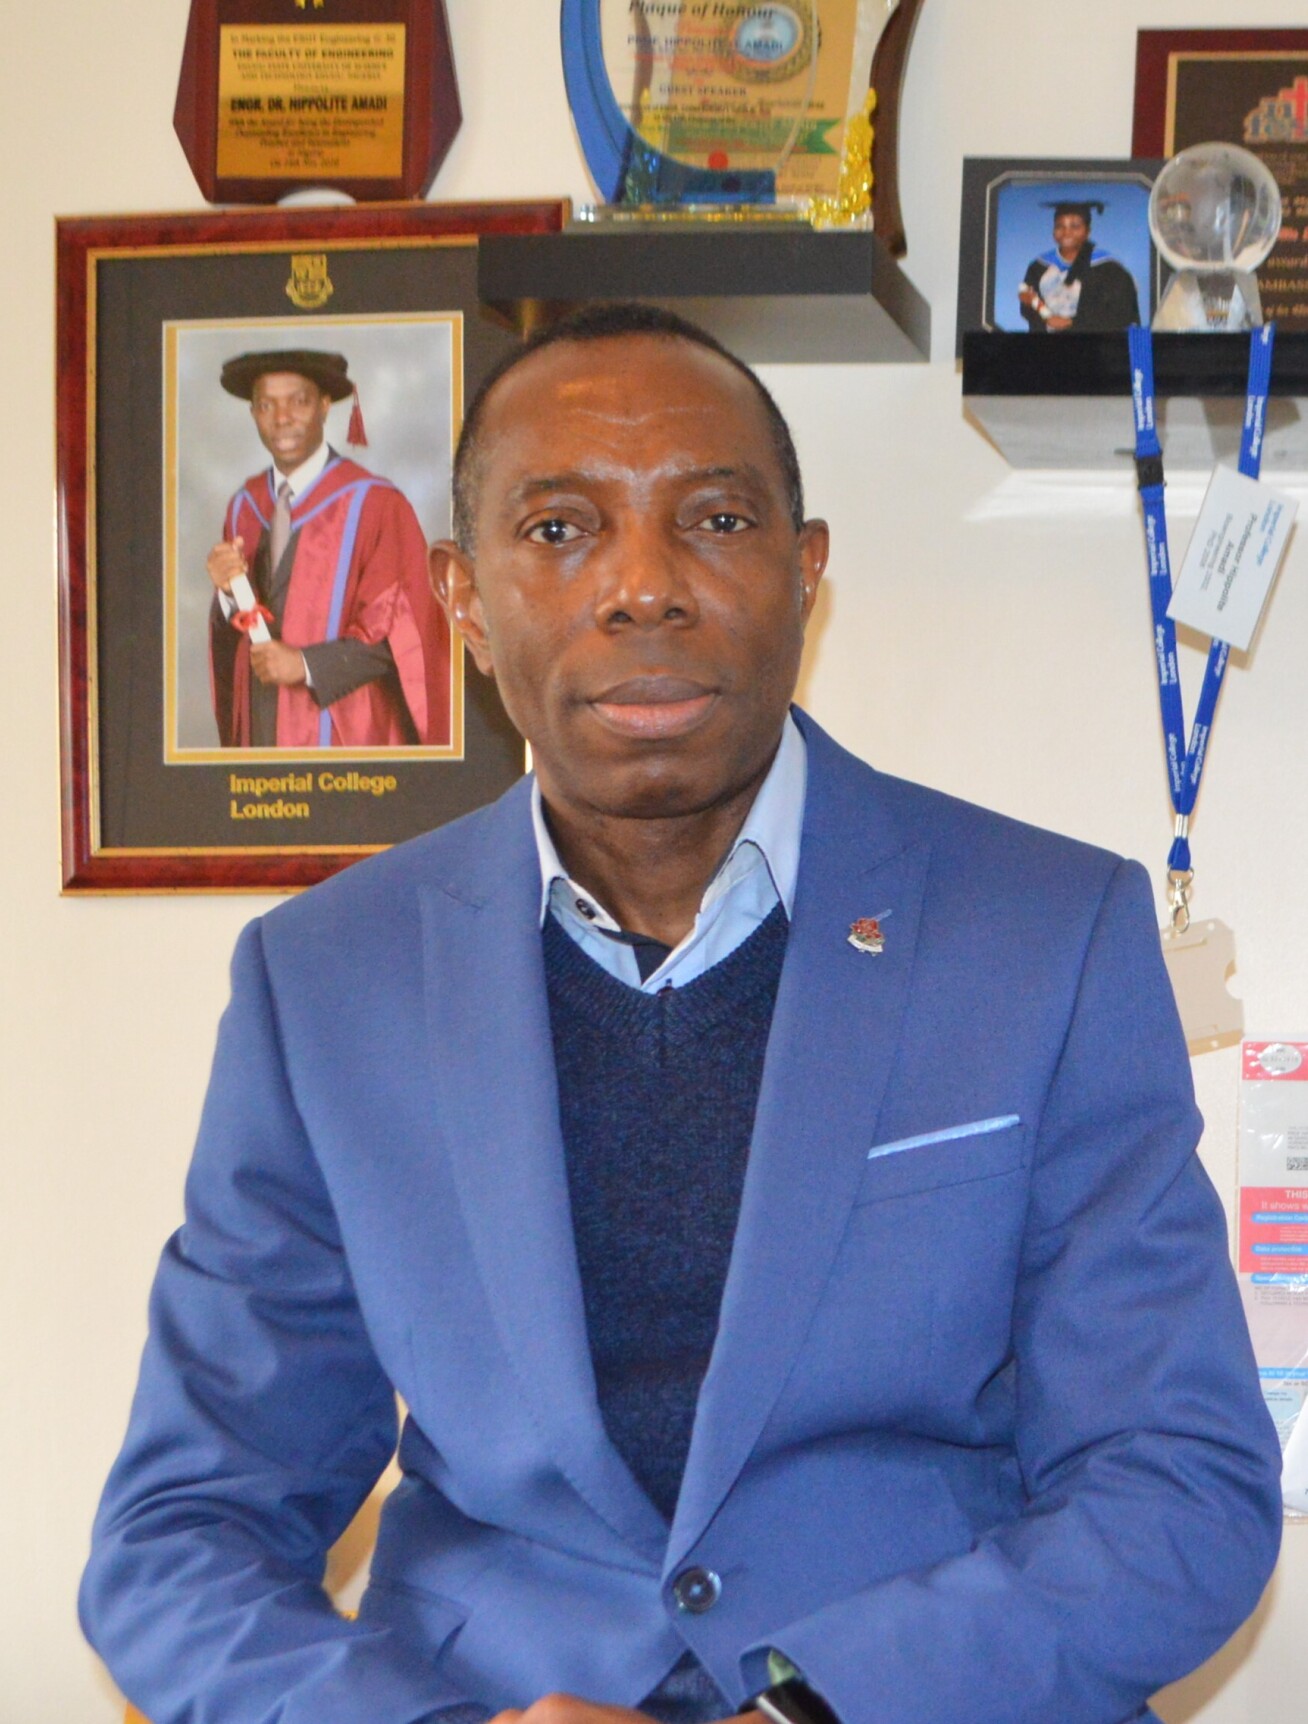 Professor Amadi wearing a blue suit sits looking at the camera